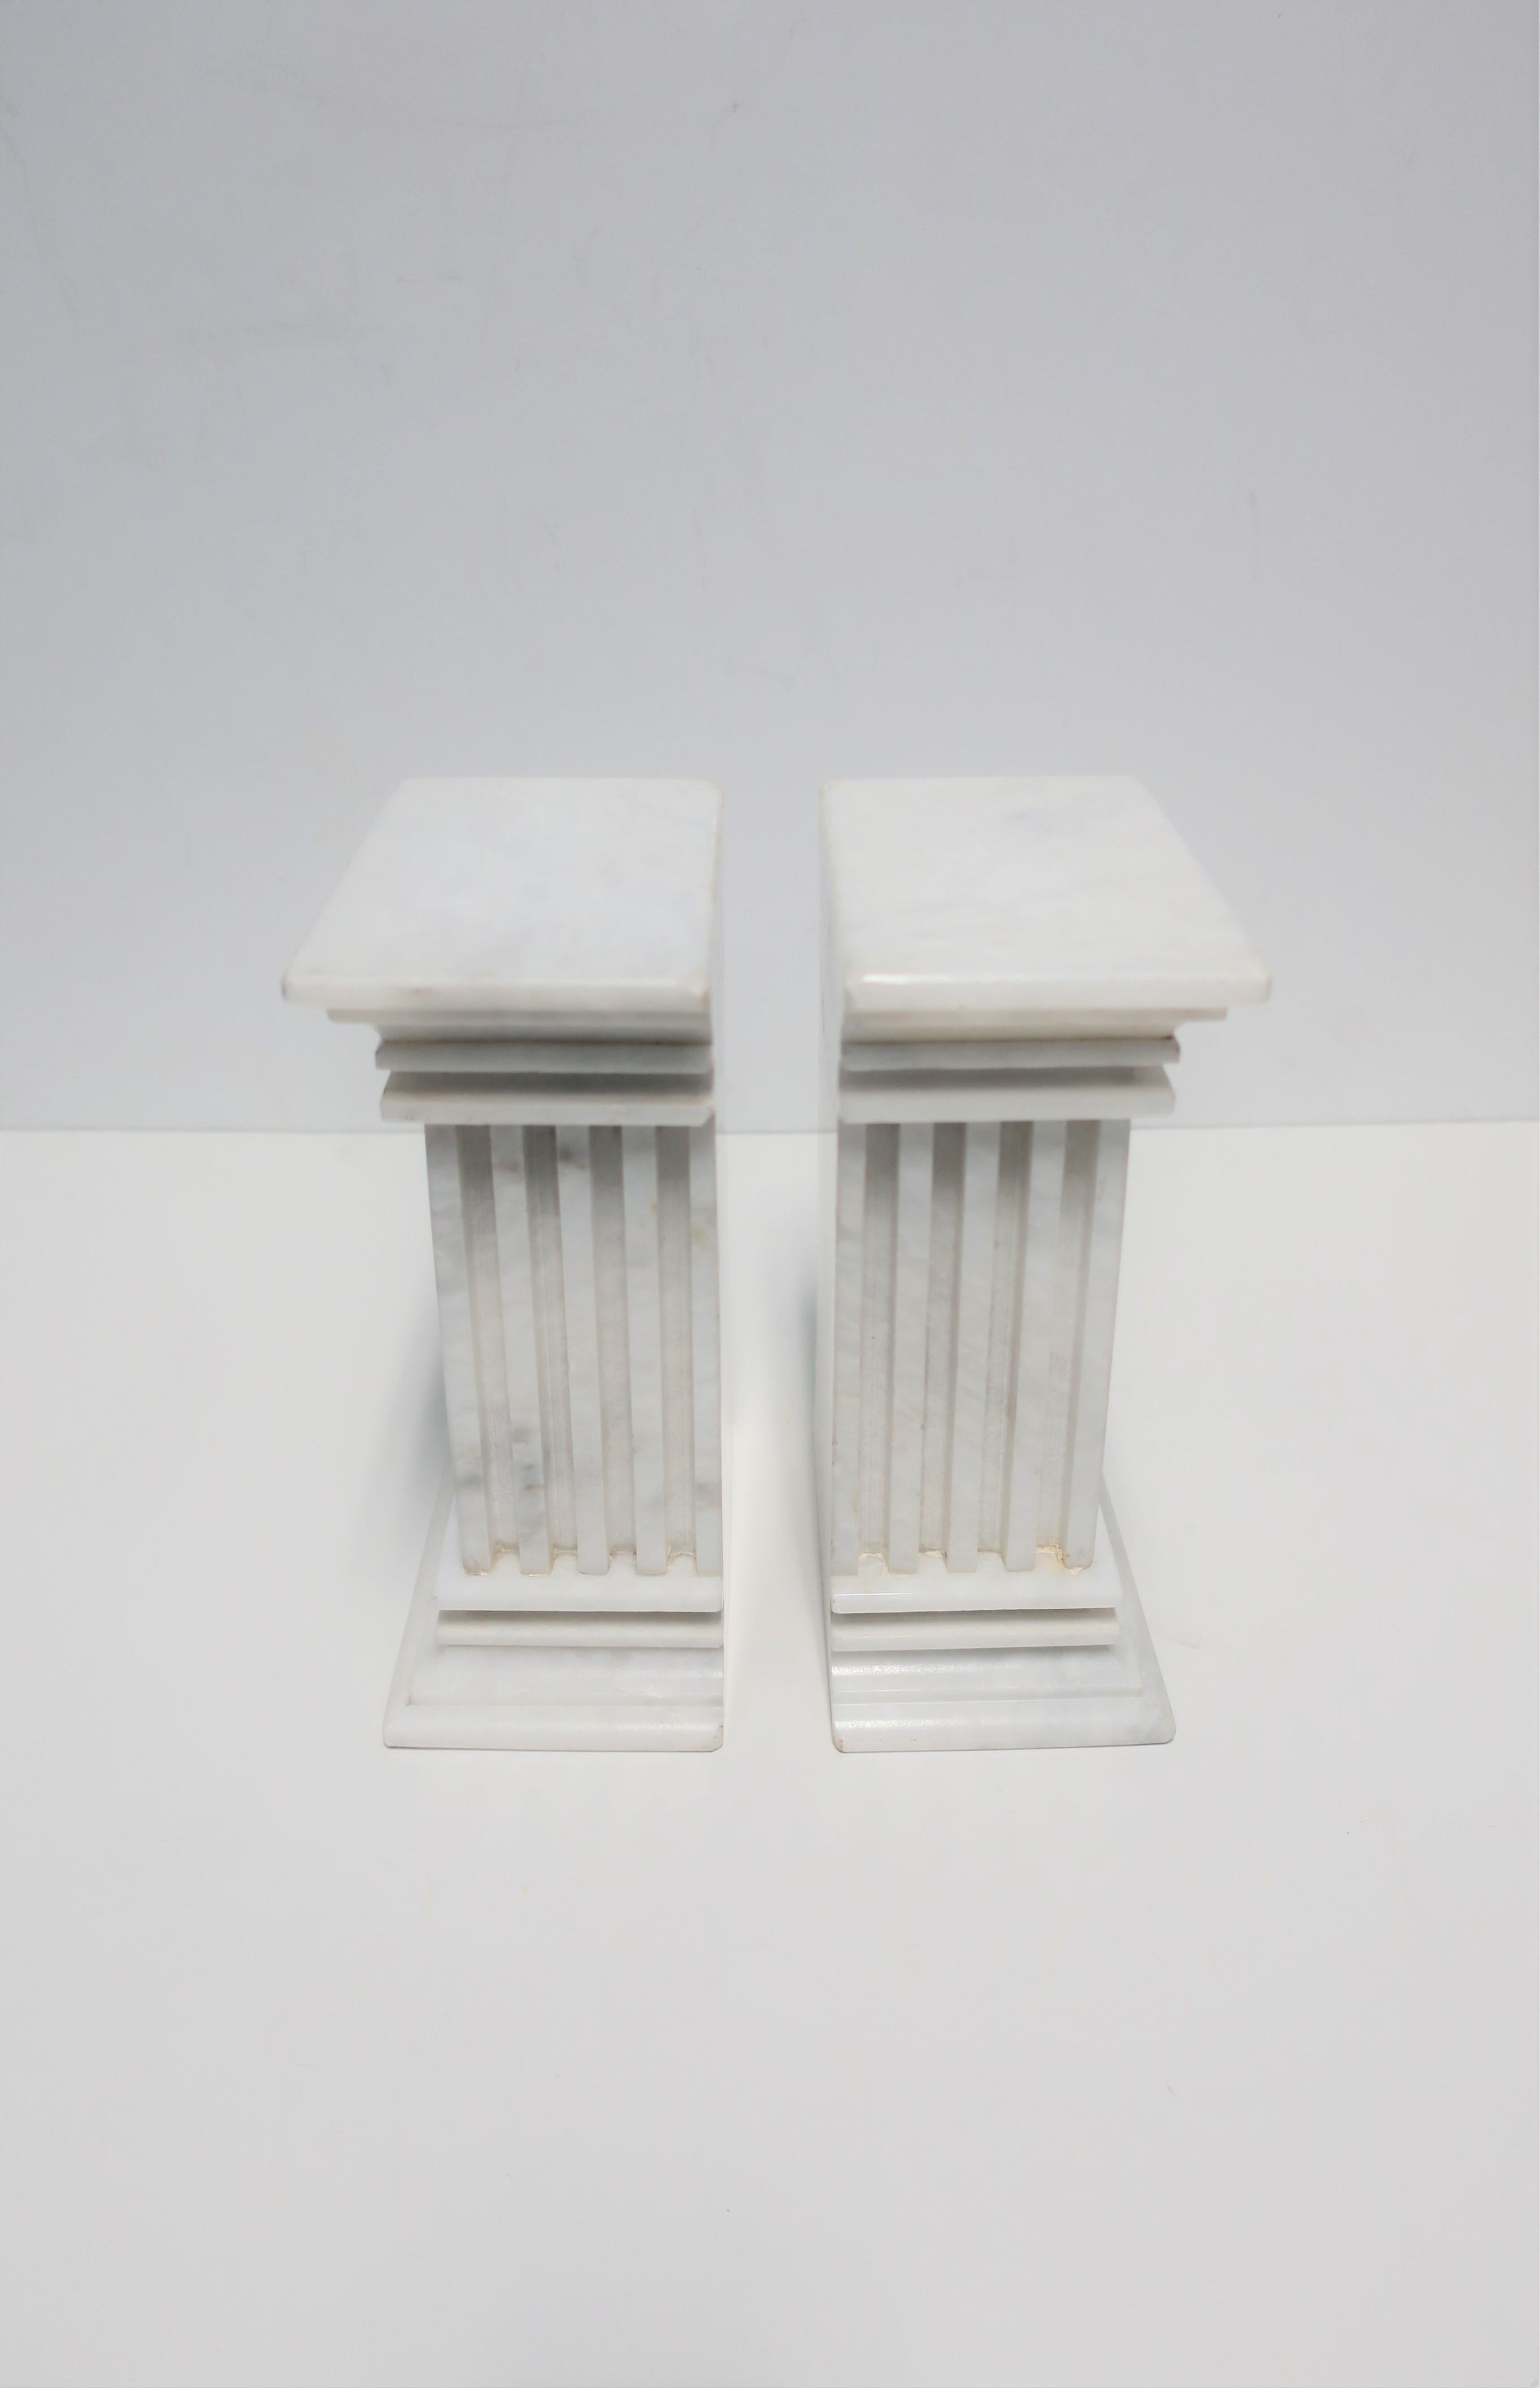 A beautiful and substantial pair of Italian white marble column pillar bookends, circa 20th century, Italy. Column architecture is in the style of the 'fluted non-tapered'. Marble is predominantly white with very light traces of grey veining. 

Each